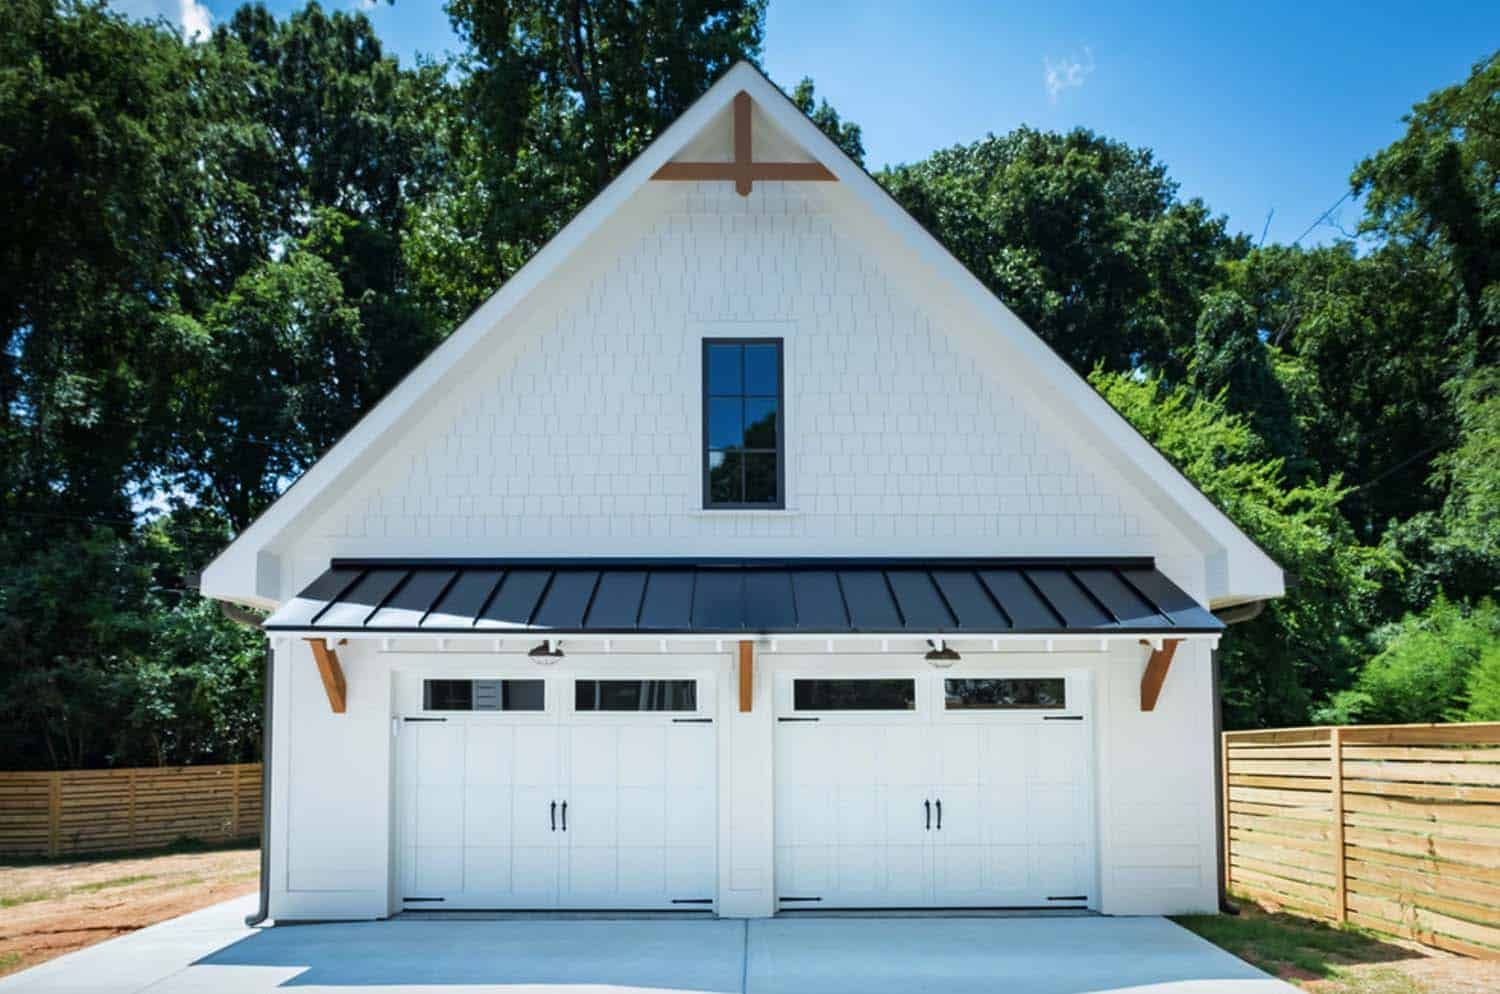 Wonderful Detached Garage Ideas For Your Home